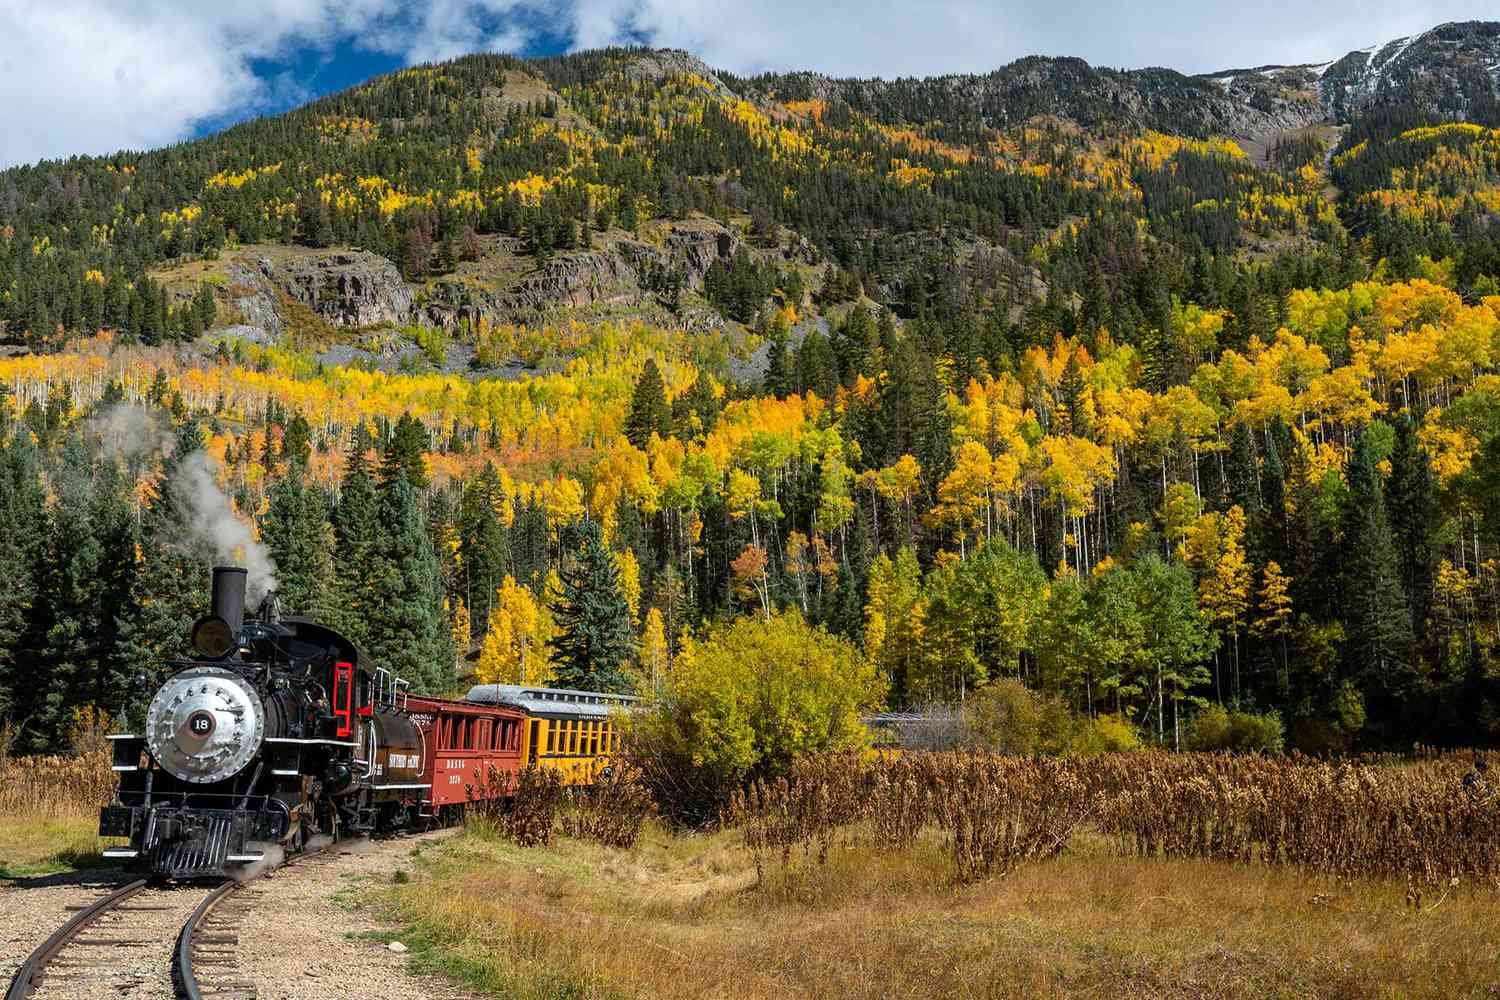 7 Epic Colorado Trains That Will Take You to Beautiful Mountains, Sparkling Rivers, and Golden Groves